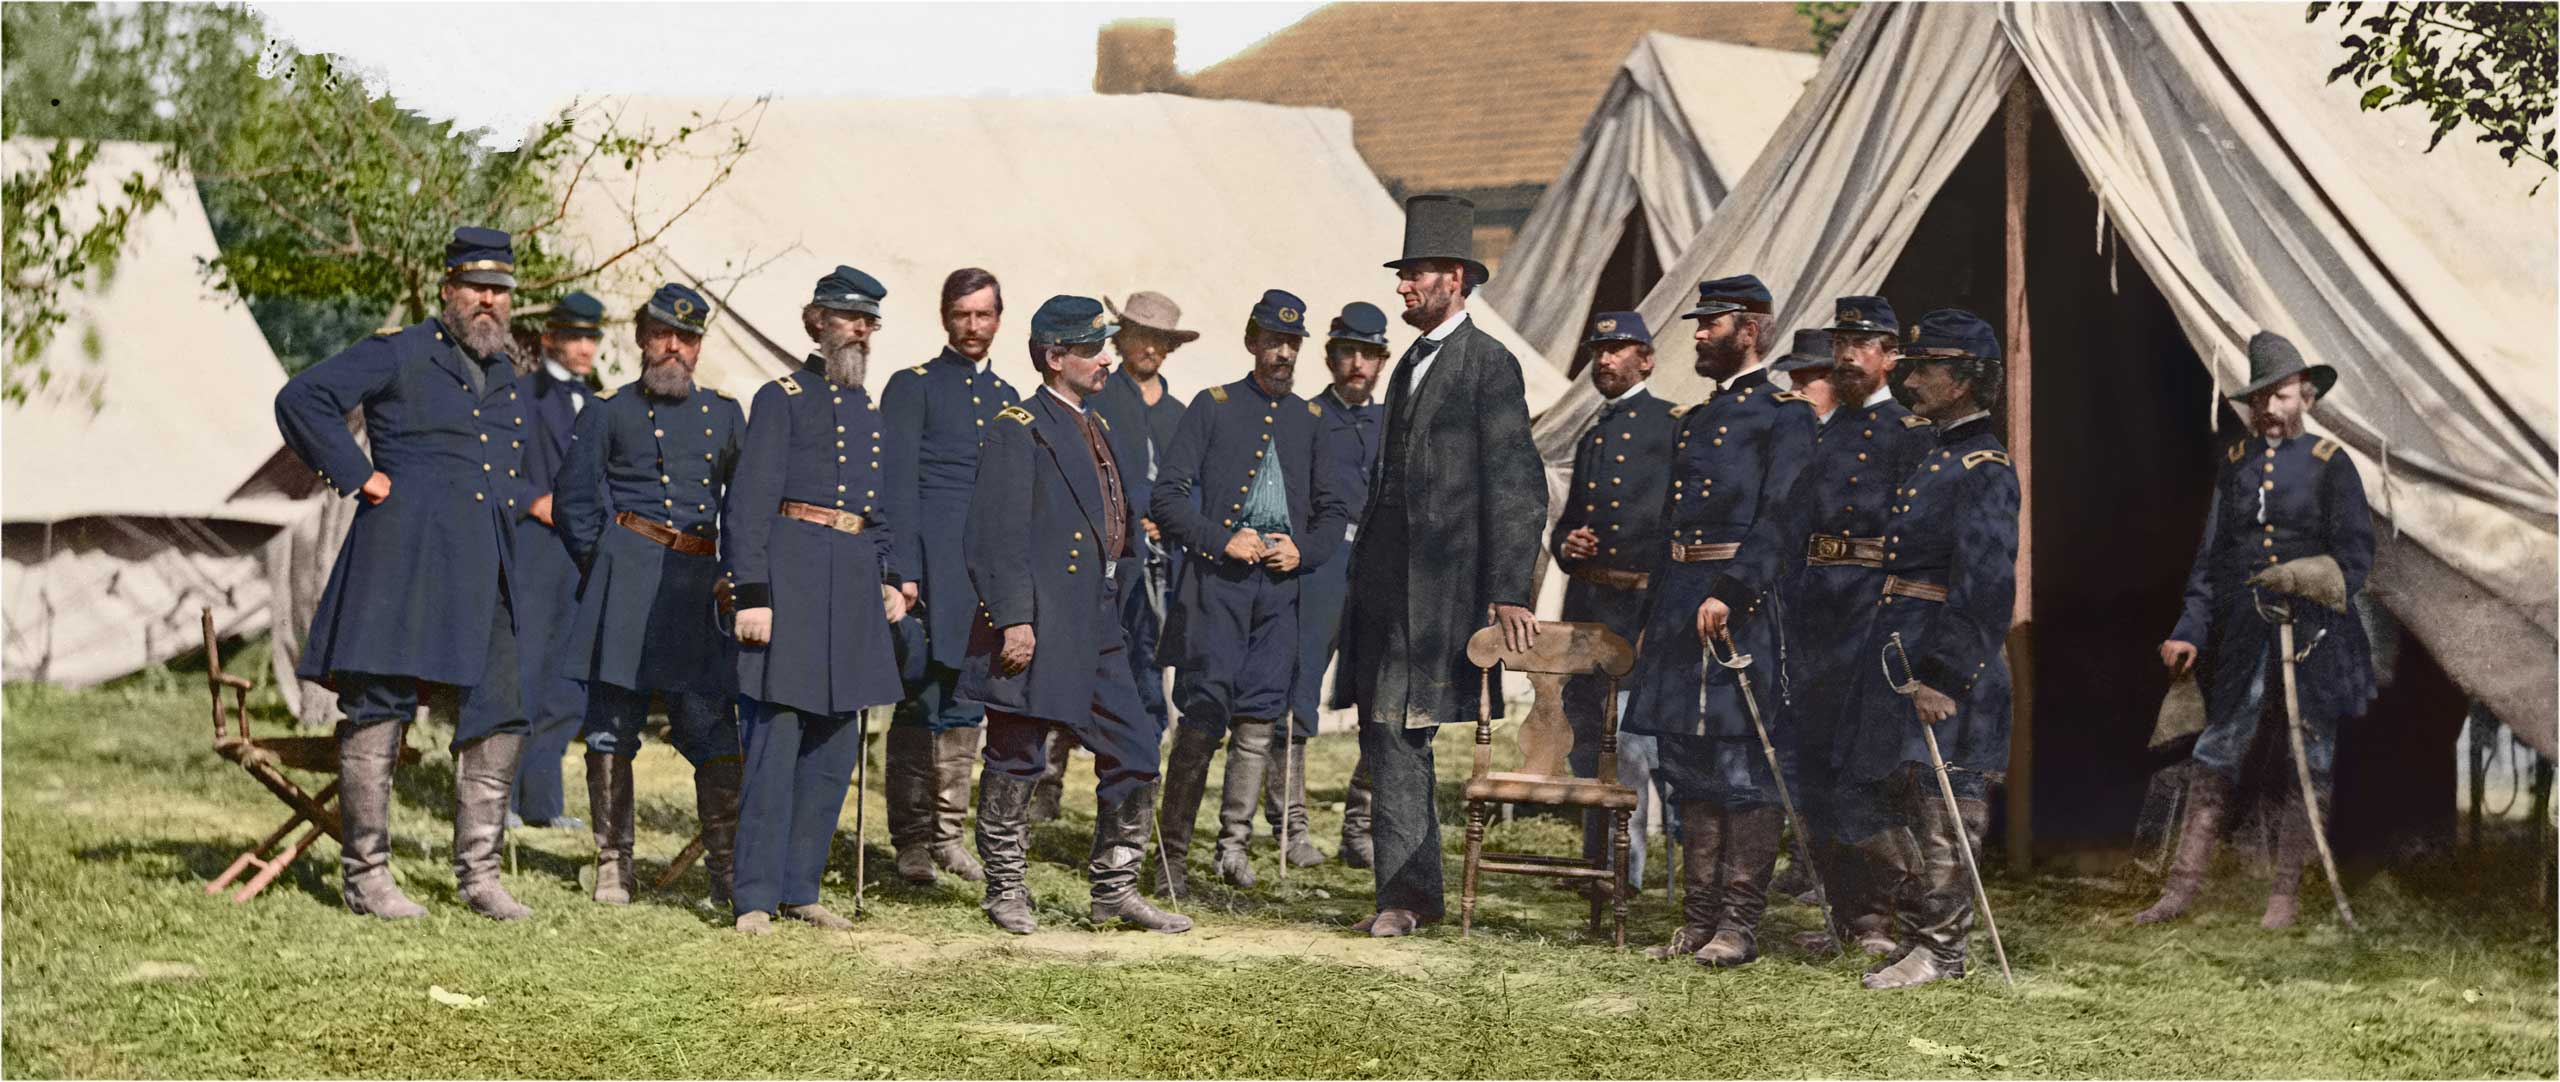 President Lincoln on the battlefield